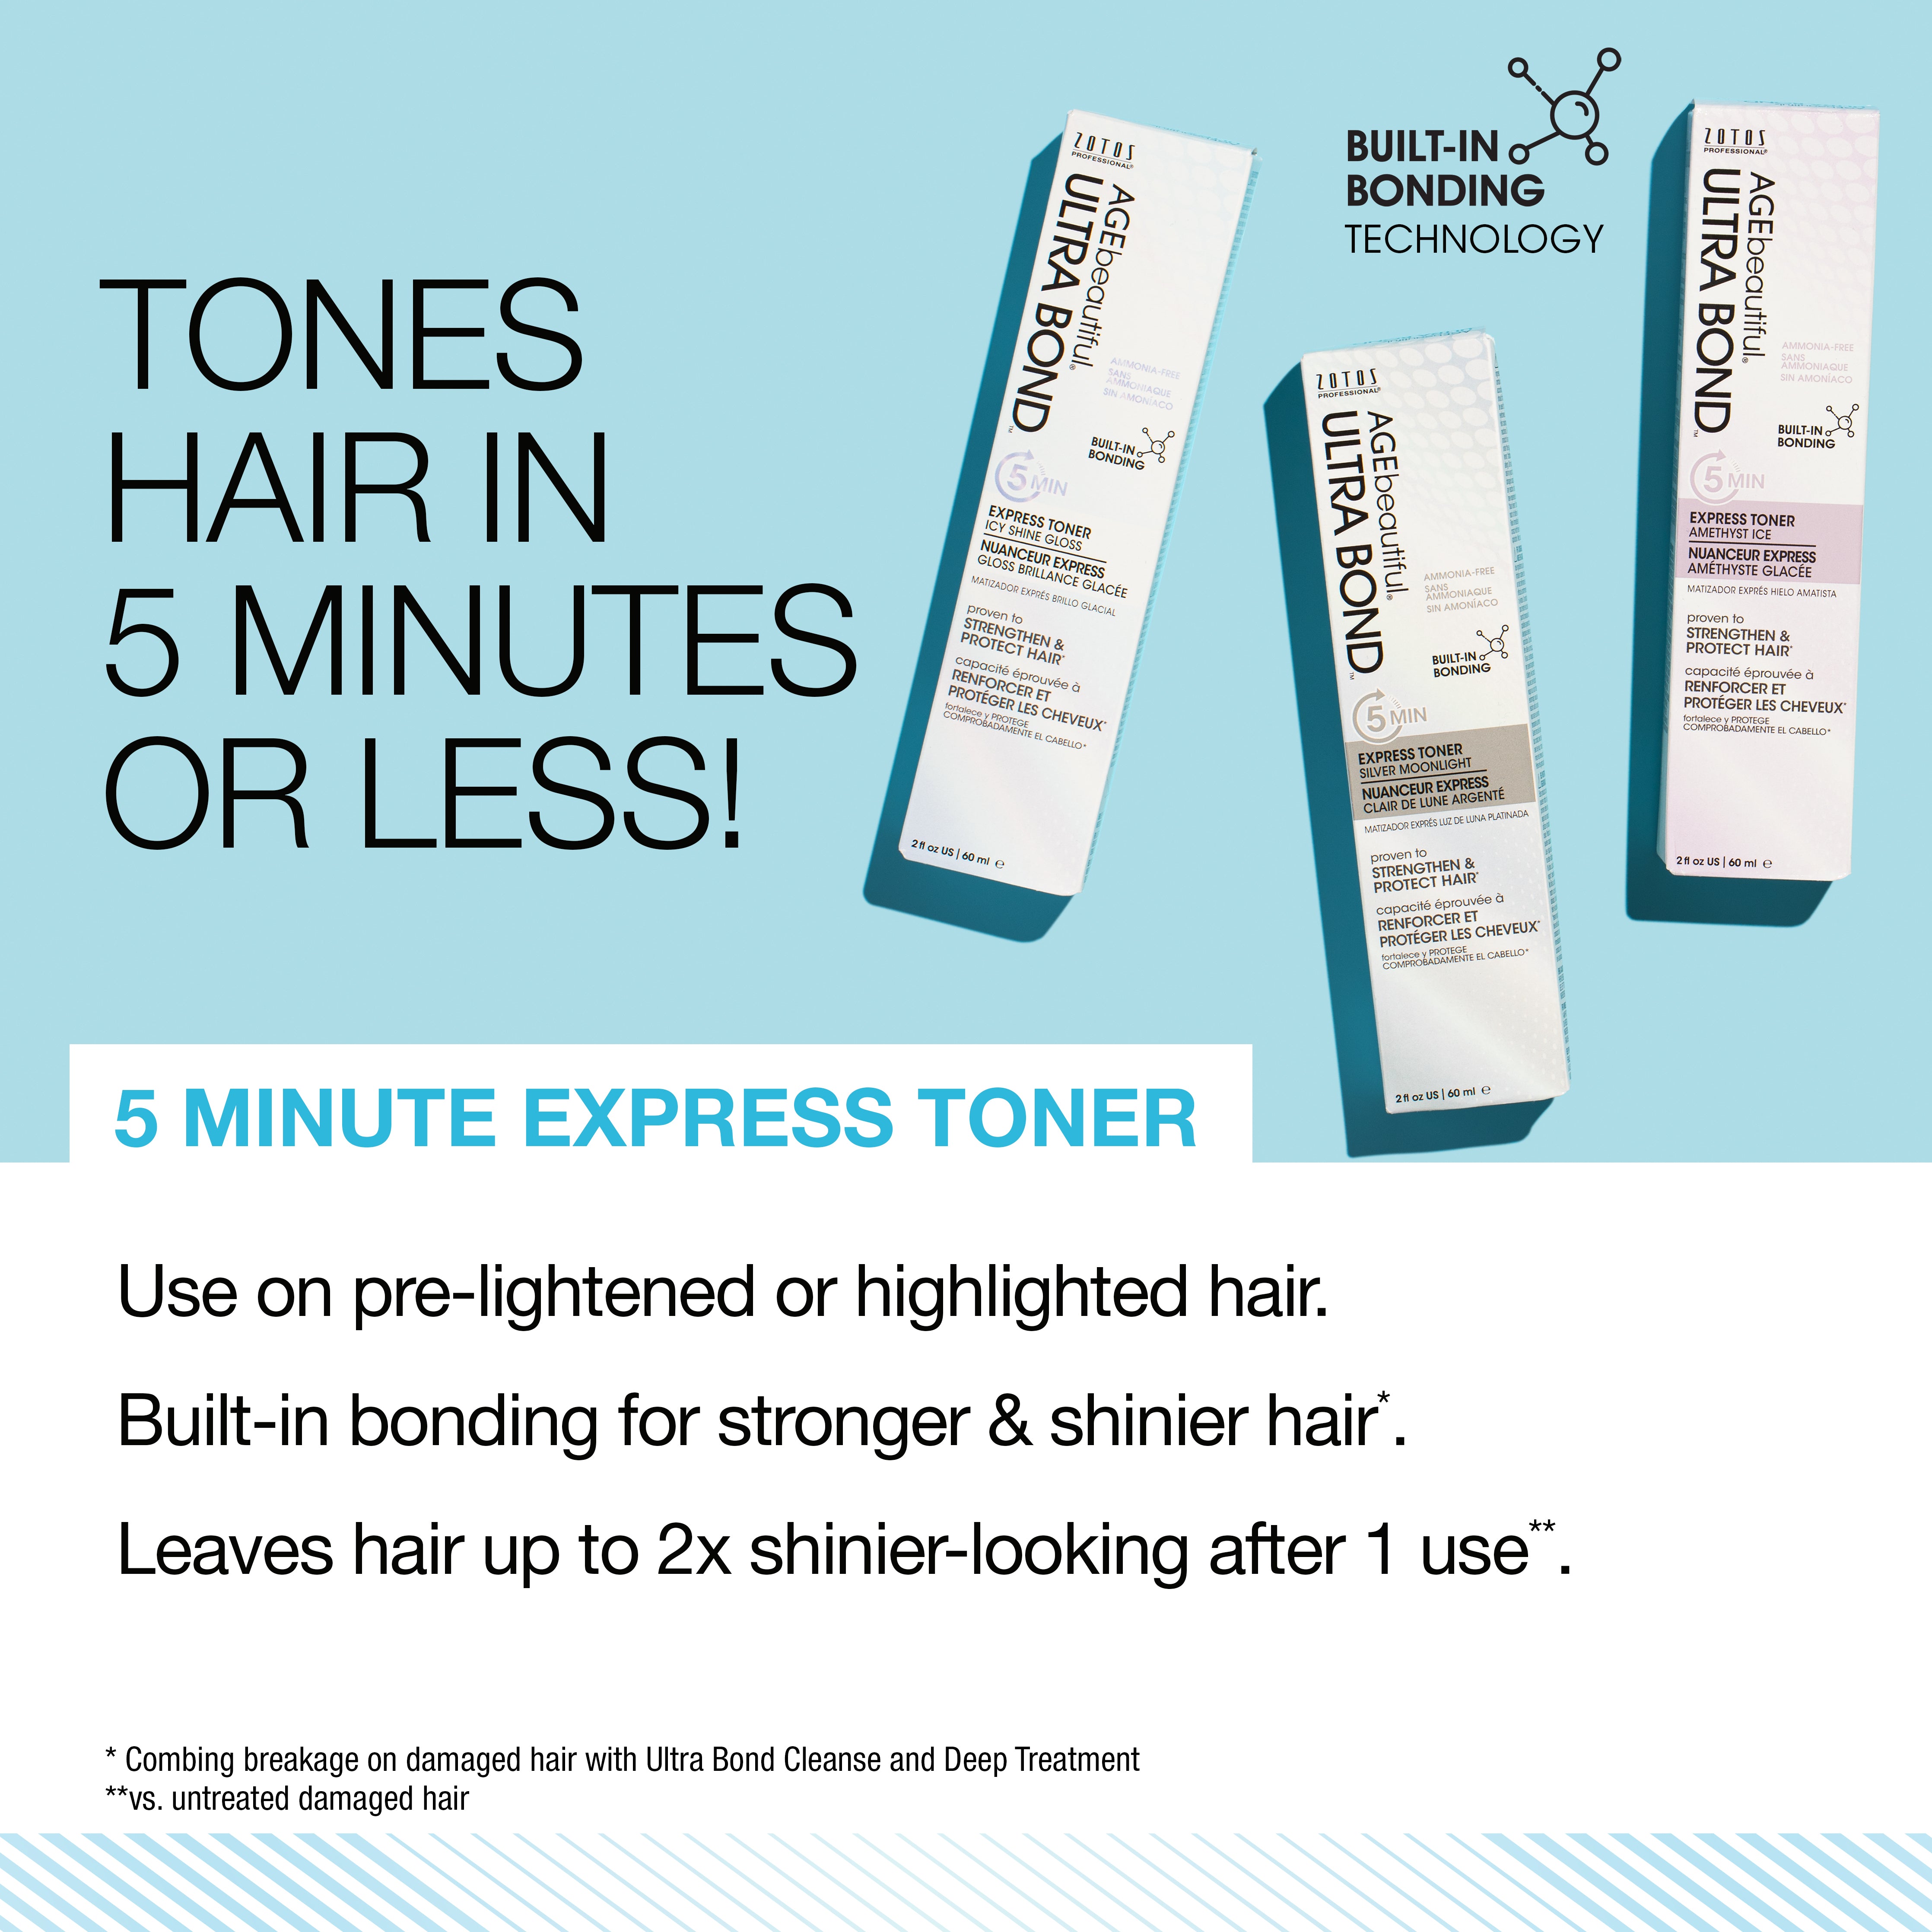 Tones hair in 5 minutes or less. Use on pre-lightened or highlighted hair. Built-in bonding for stronger and shinier hair. Leaves hair up to 2X shinier-looking after 1 use. 